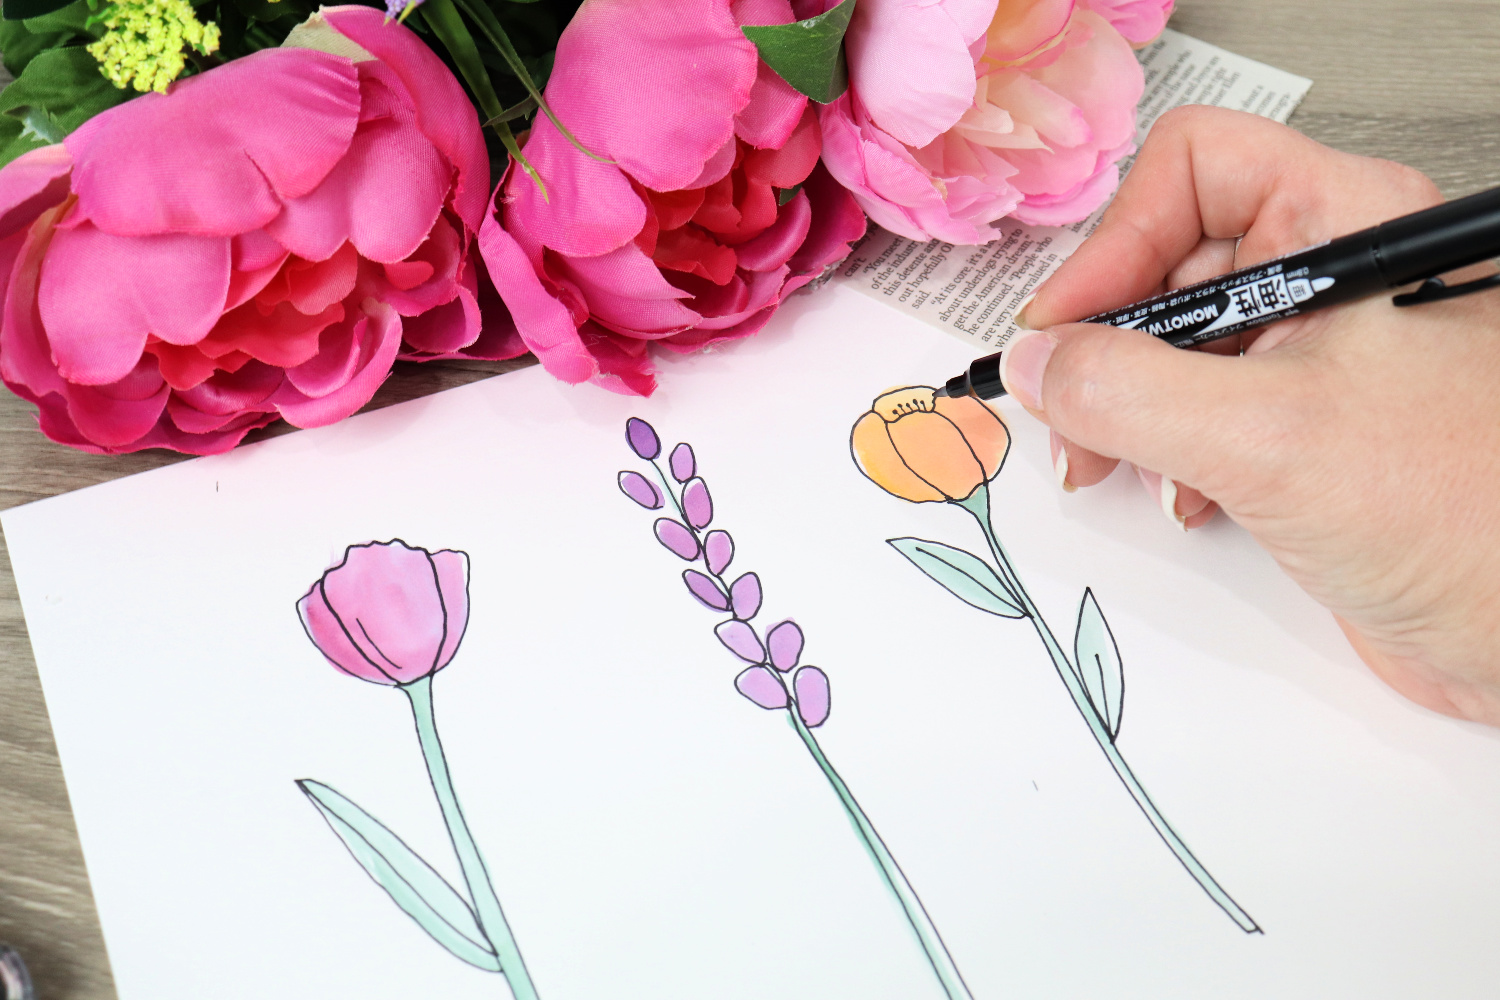 Image contains Amy’s hand holding a Tombow MONO Twin Permanent Marker and drawing a floral outline on top of the watercolored shapes. Faux flowers and a newspaper clipping sit in the background on a wooden desktop.